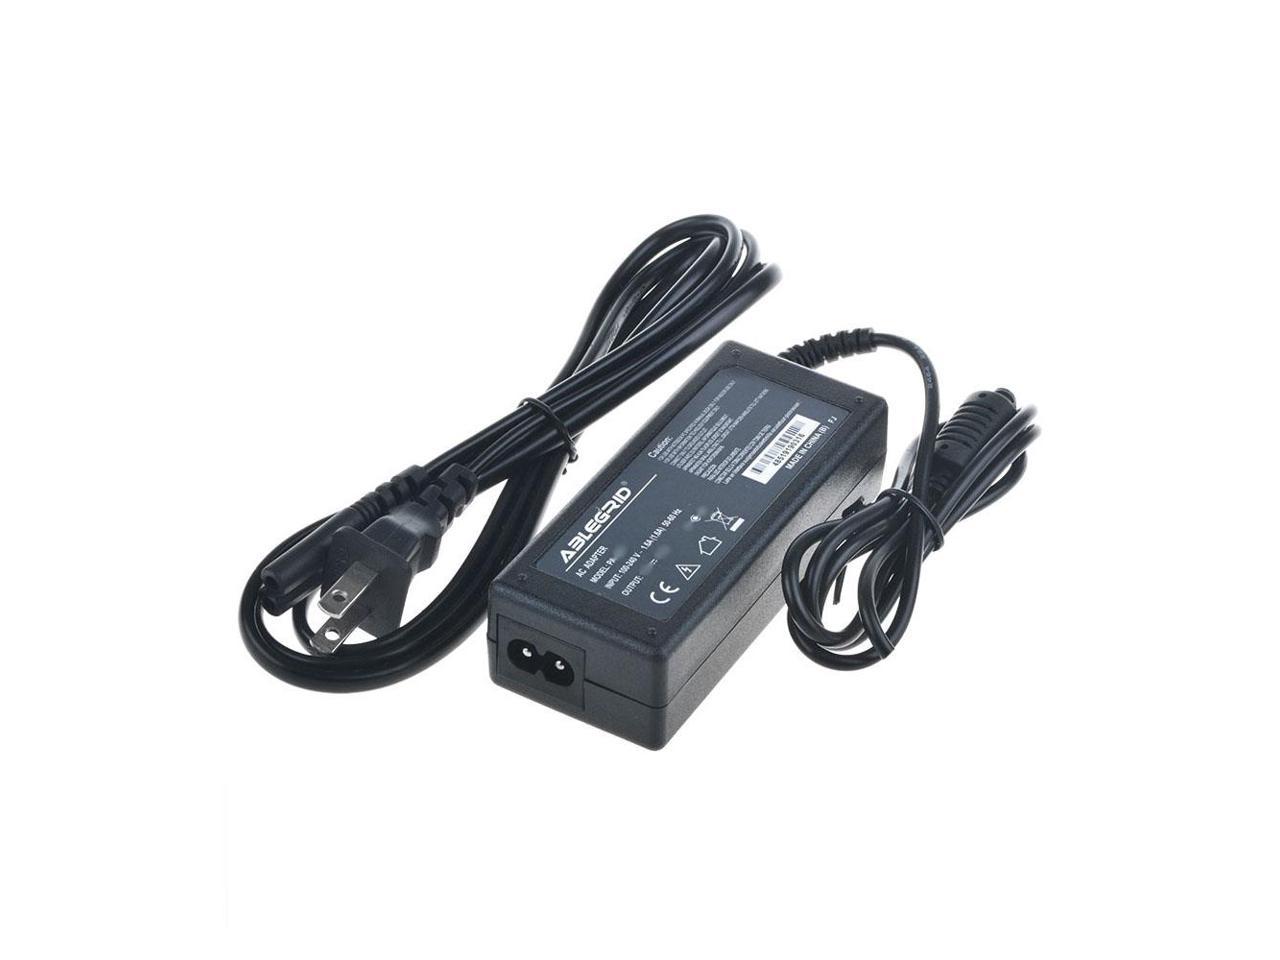 Moeras menu Dom ABLEGRID 19V 3.42A 65W AC DC Adapter For DELTA Electronics, Inc. N17908 V85  R33030 Laptop Notebook PC 19VDC 3.42 Amp 65 Watts Power Supply Cord Cable  Battery Charger Worldwide Voltage Use Mains